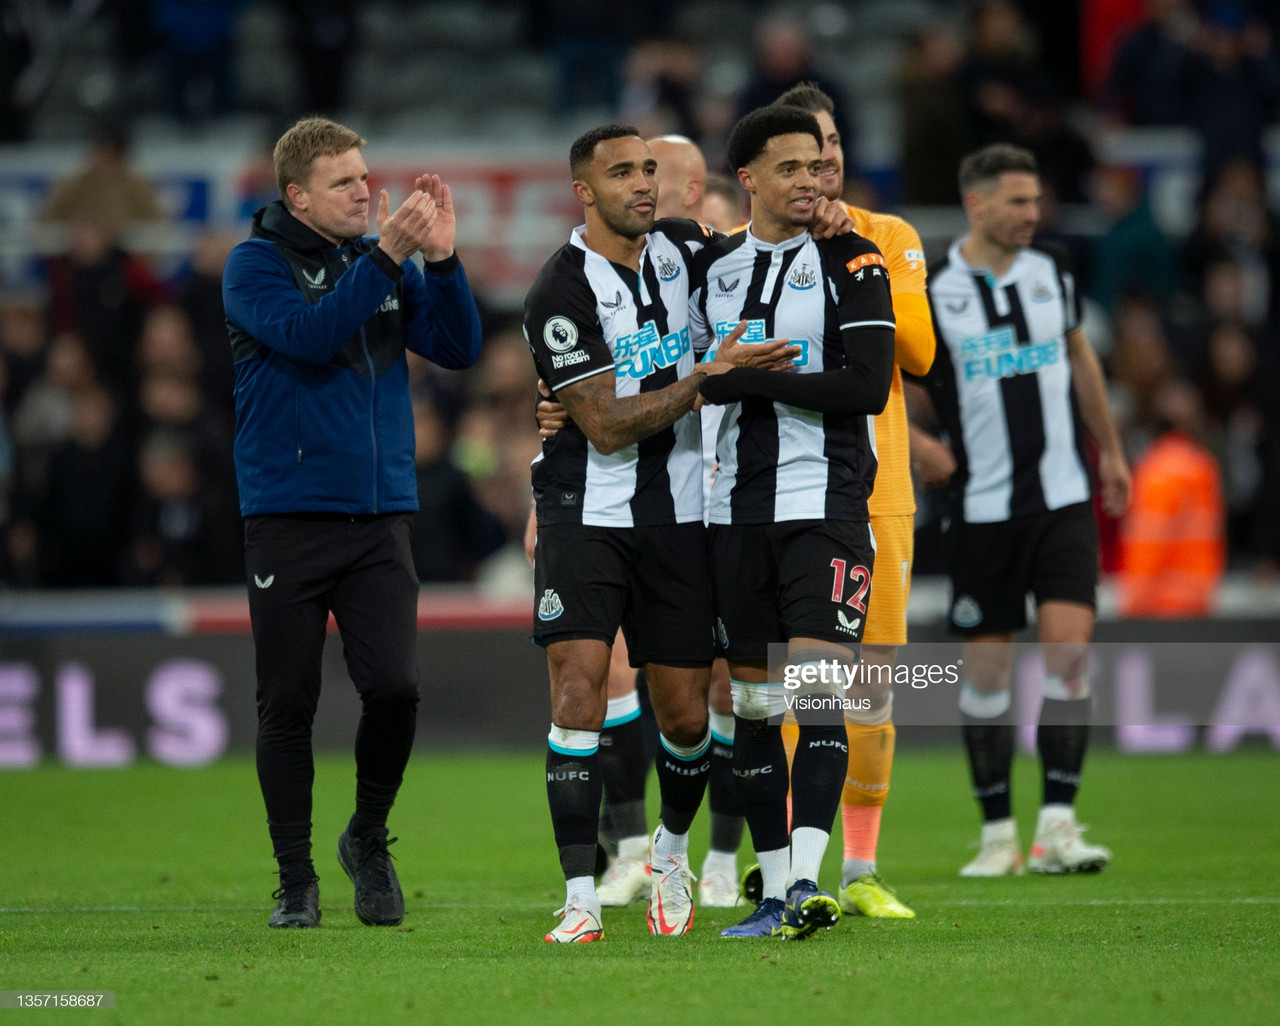 Wilson, Joelinton, Shelvey and Lewis the top performers – Newcastle player ratings after 1-0 Burnley win